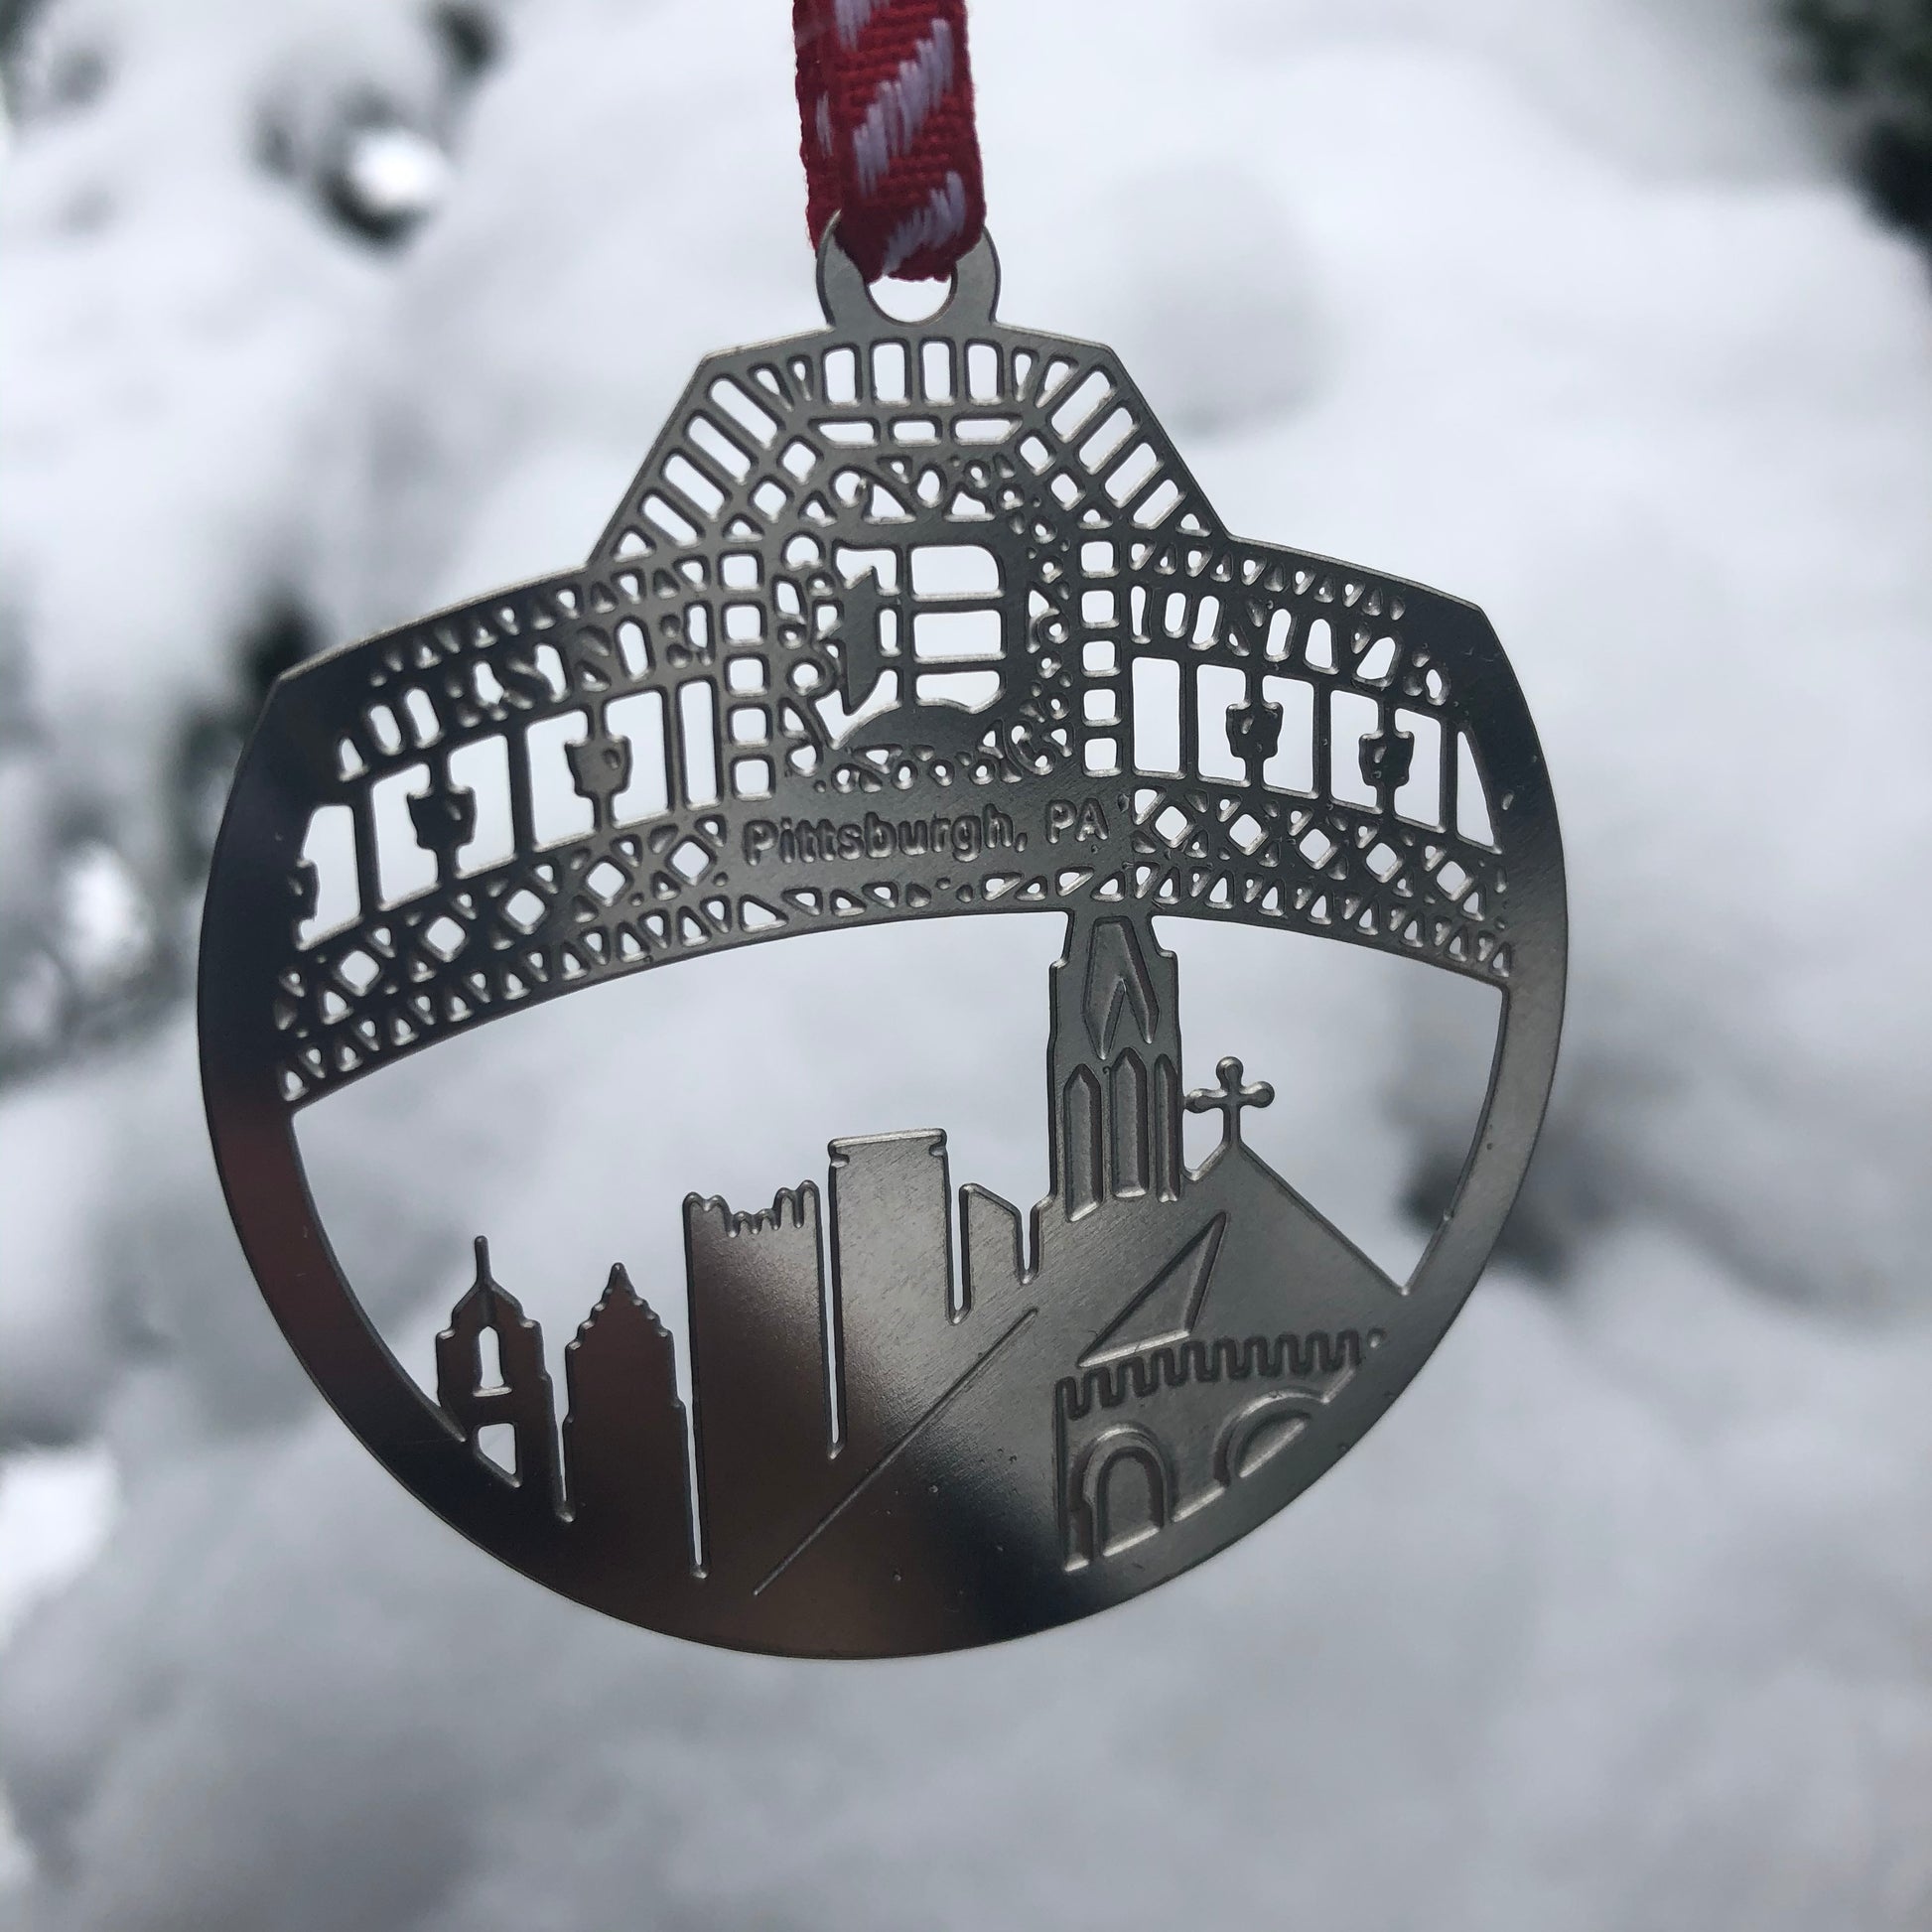 Duquesne University Campus Ornament, Pittsburgh by Audra Azoury